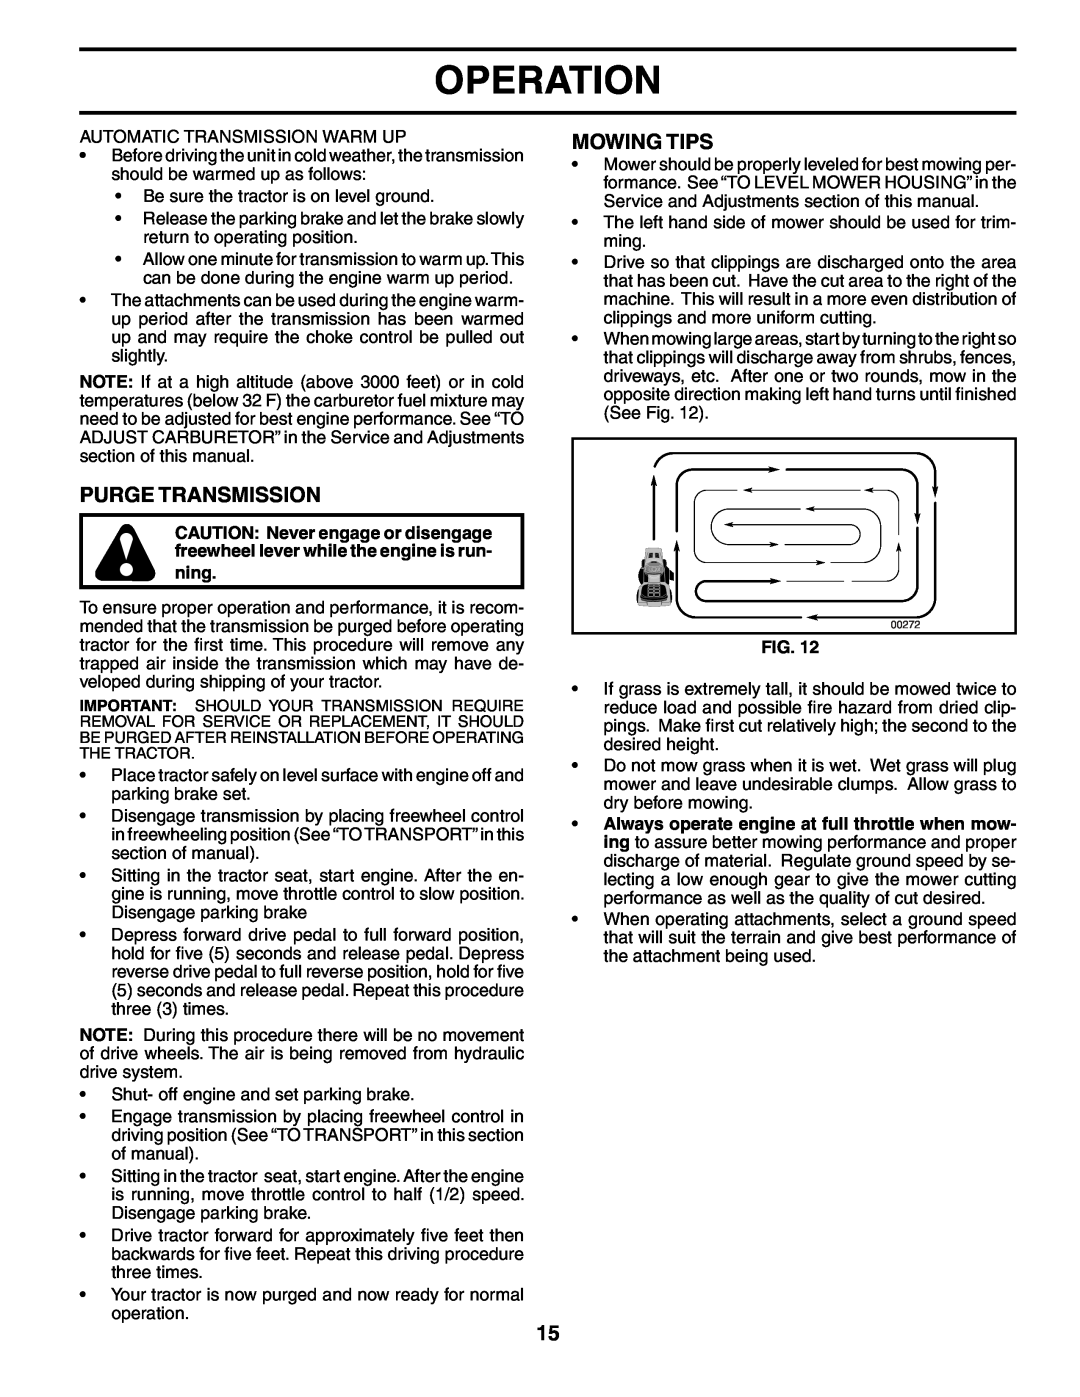 Poulan PD25PH48STB owner manual Purge Transmission, Mowing Tips, Operation, ning 